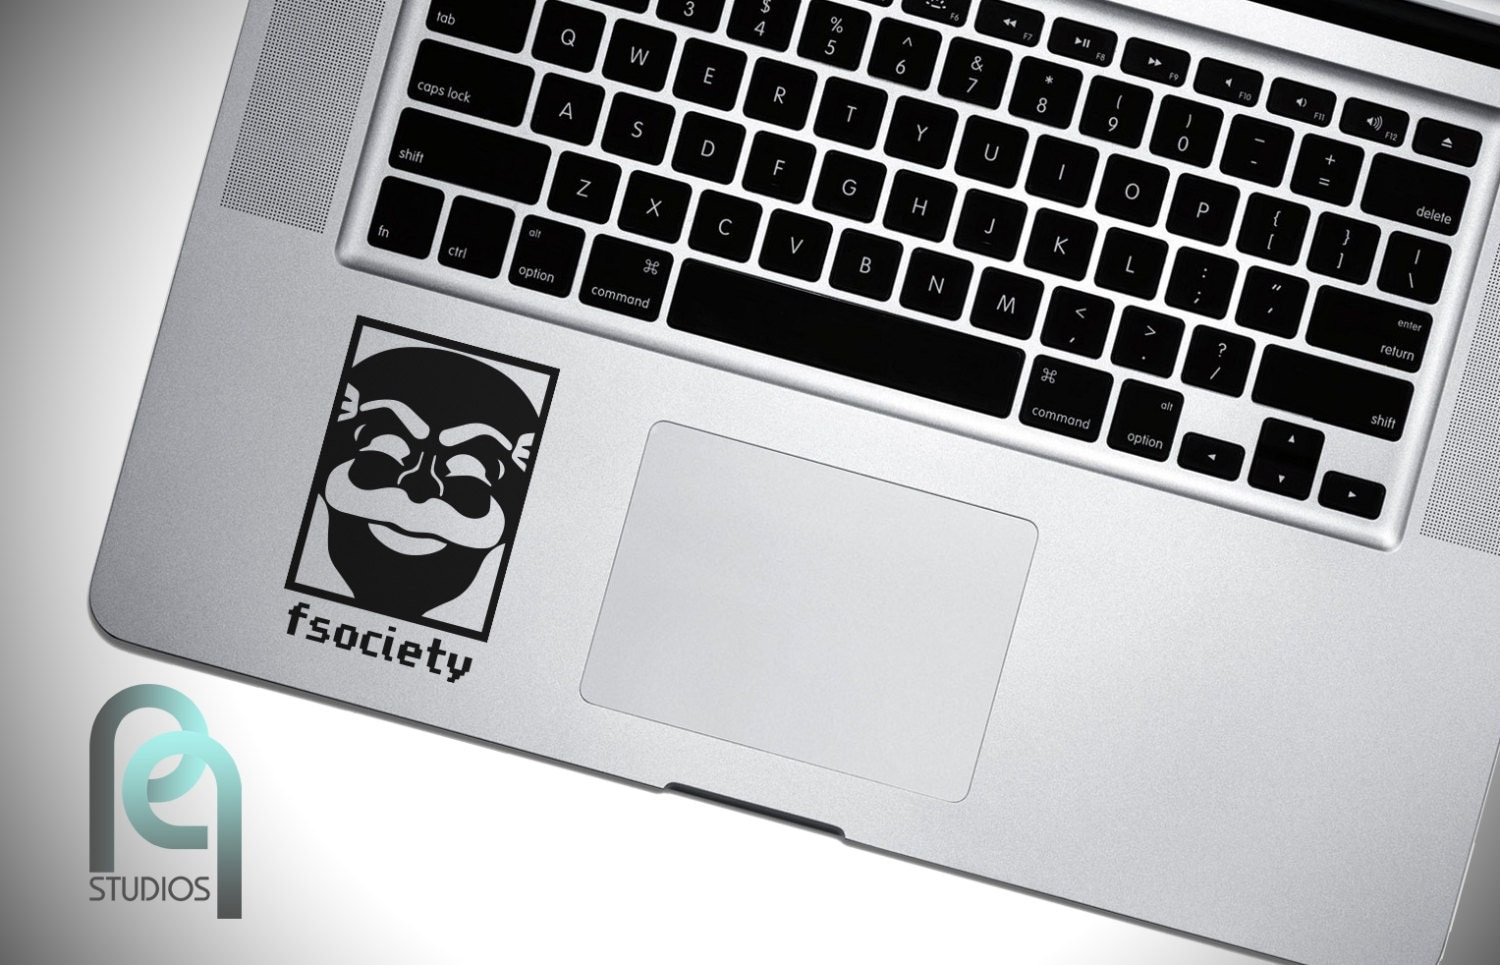 Map Of The World Keyboard Sticker For Windows fsociety - inspired by Mr. Robot High Quality matte vinyl macbook or laptop keyboard decal, sticker